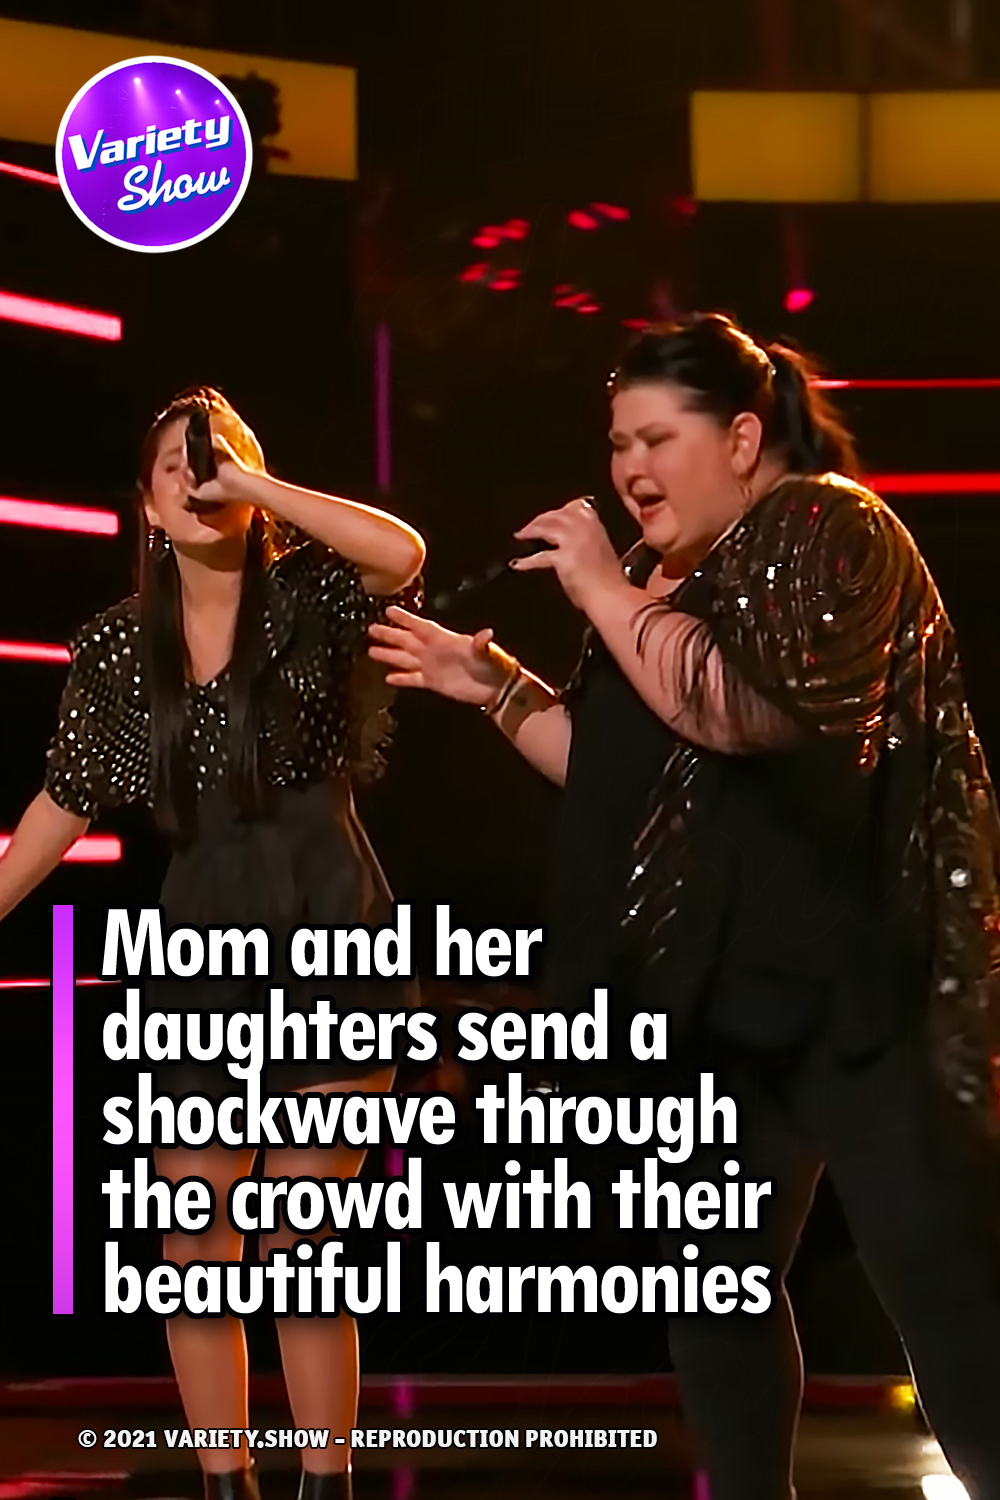 Mom and her daughters send a shockwave through the crowd with their beautiful harmonies